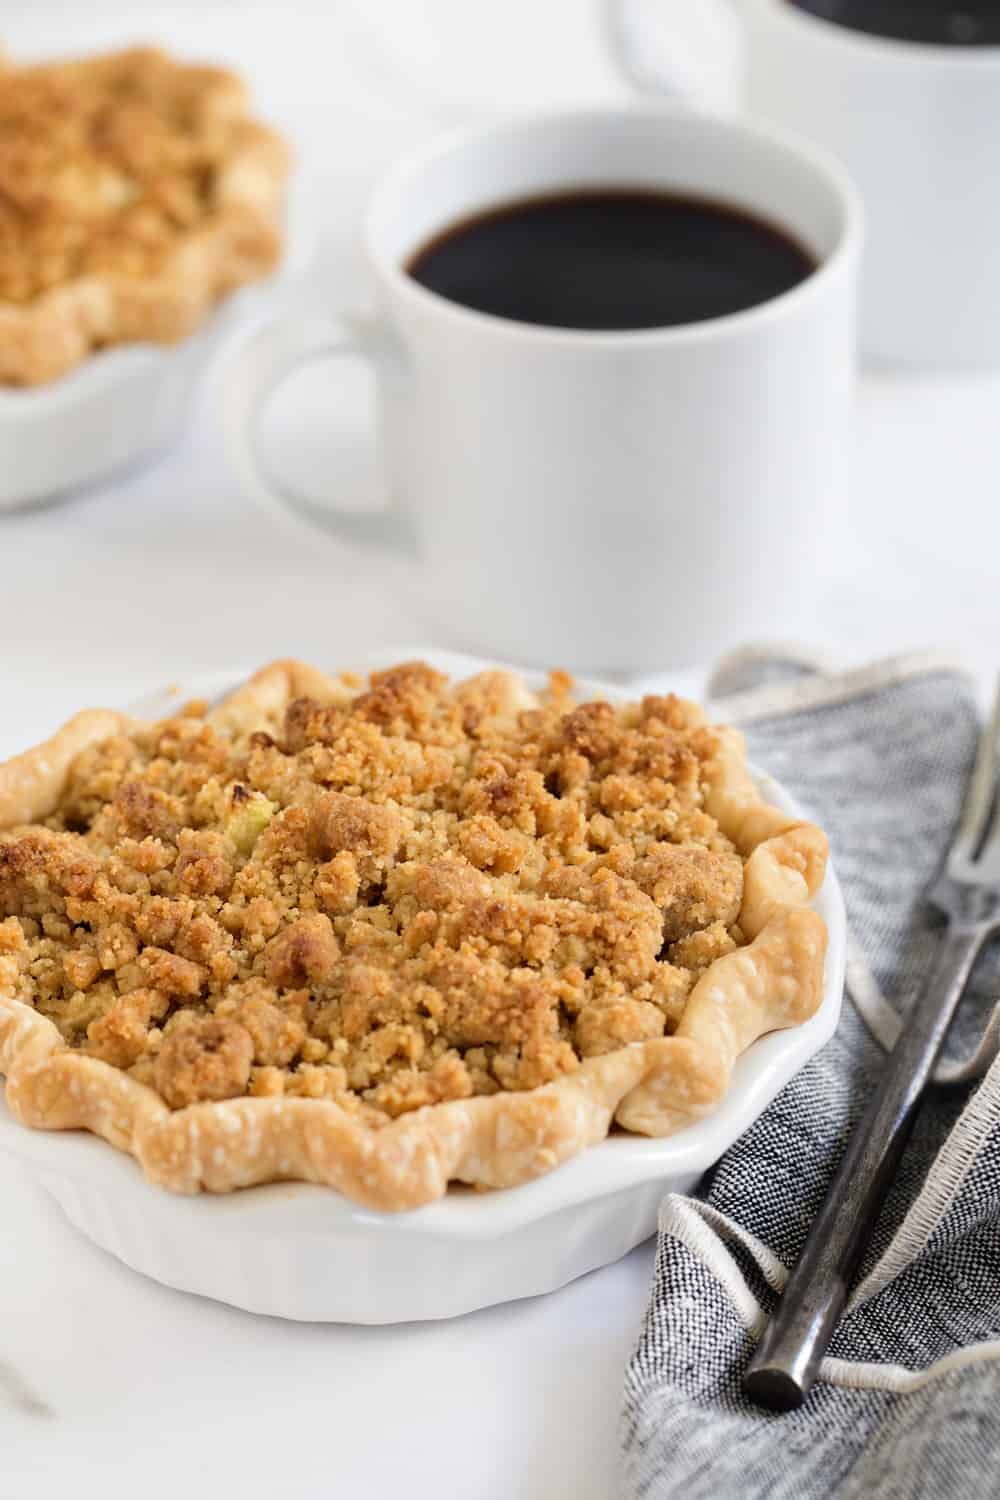 Mini Apple Pies are an individual twist on everyone’s favorite classic apple pie. So perfect for the holidays.